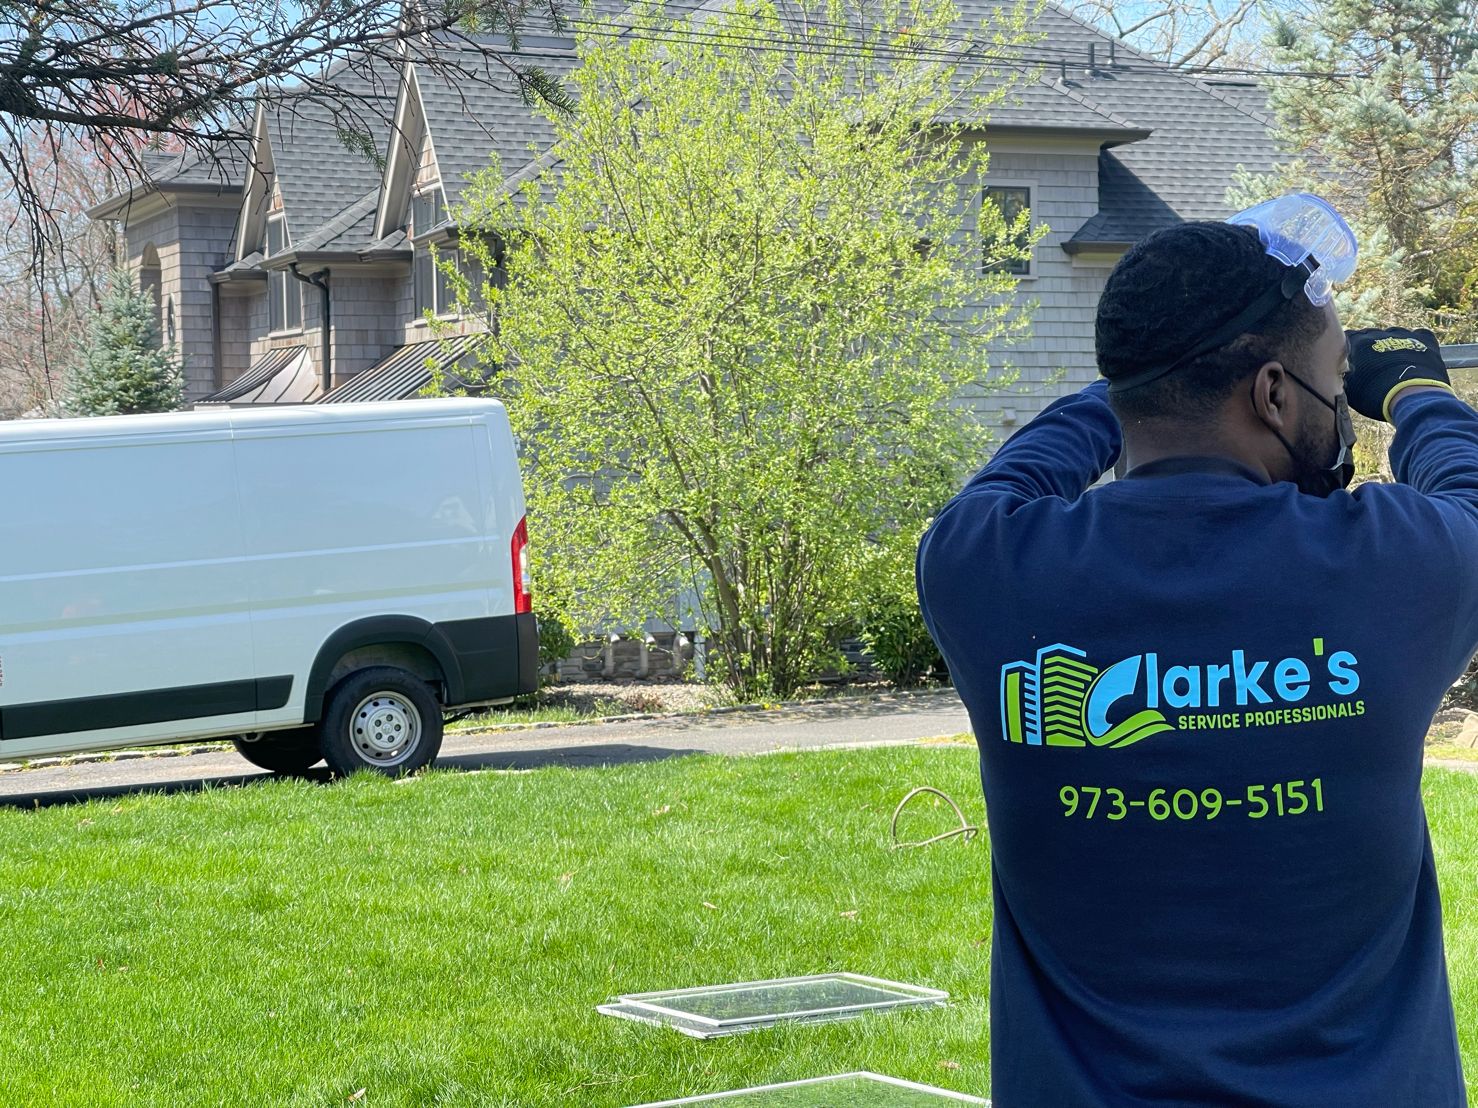 Clarke's Service Professionals , Power washers